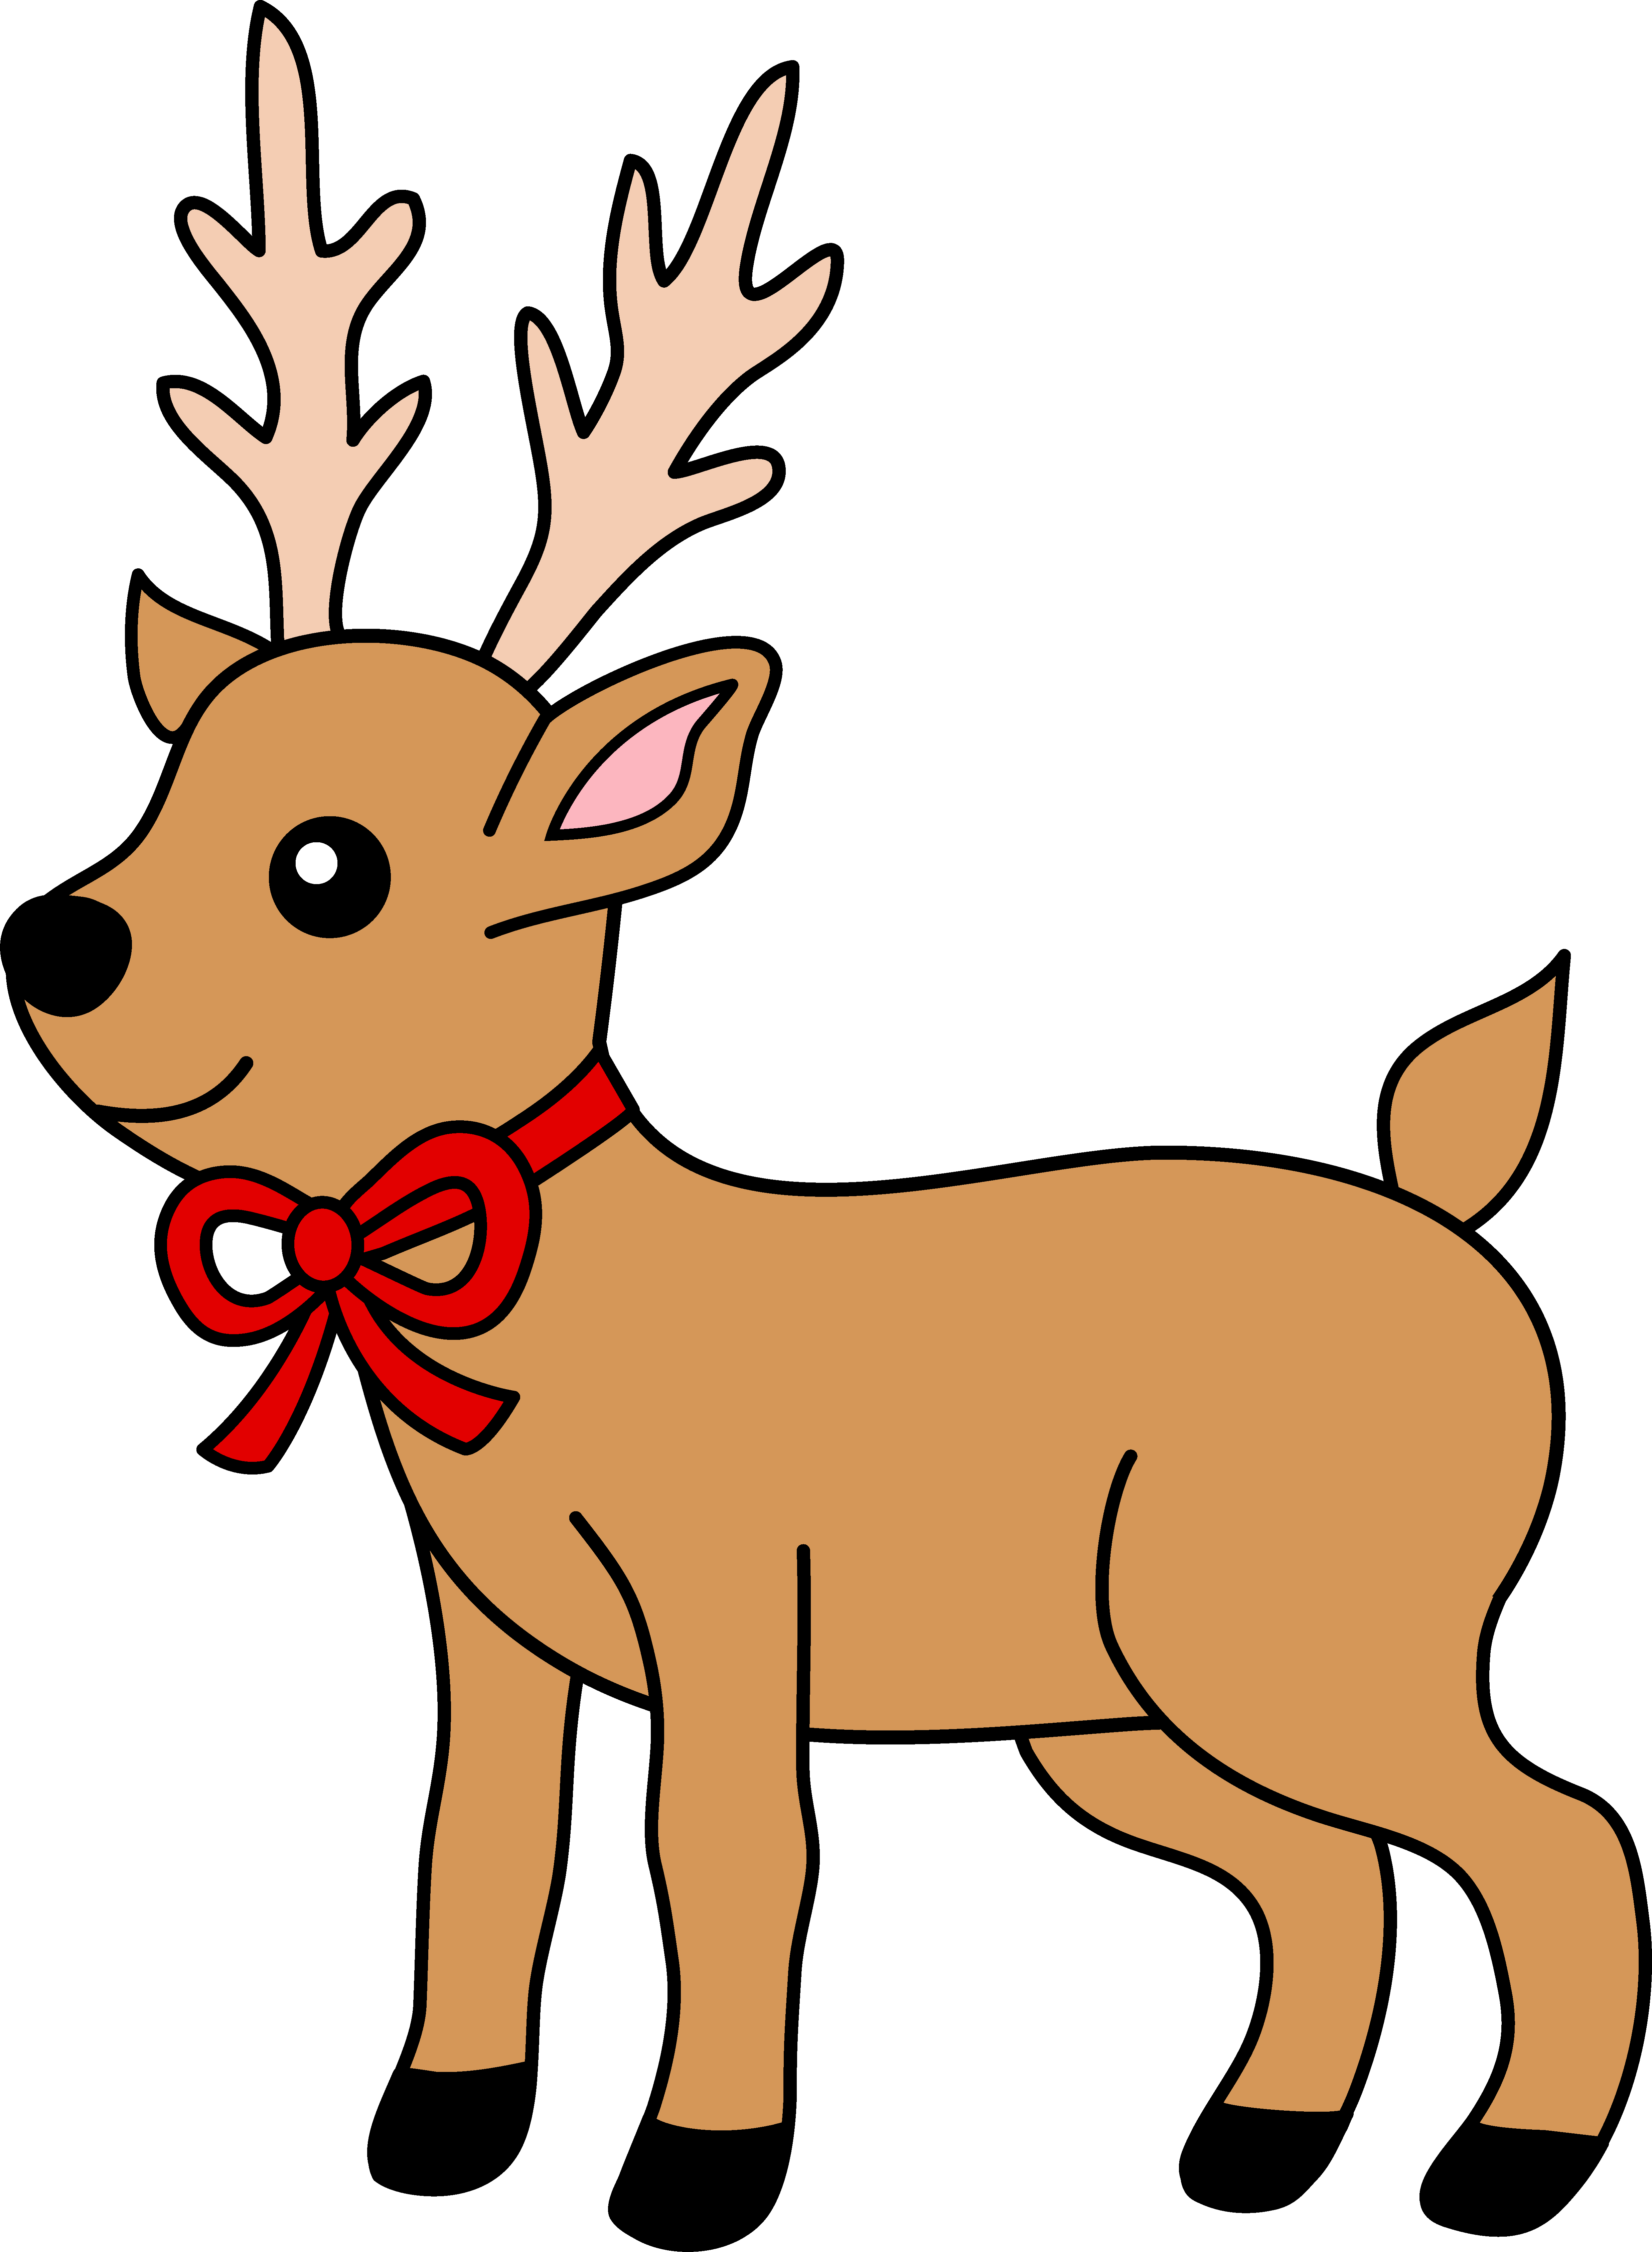 Reindeer Holding a Candy Cane